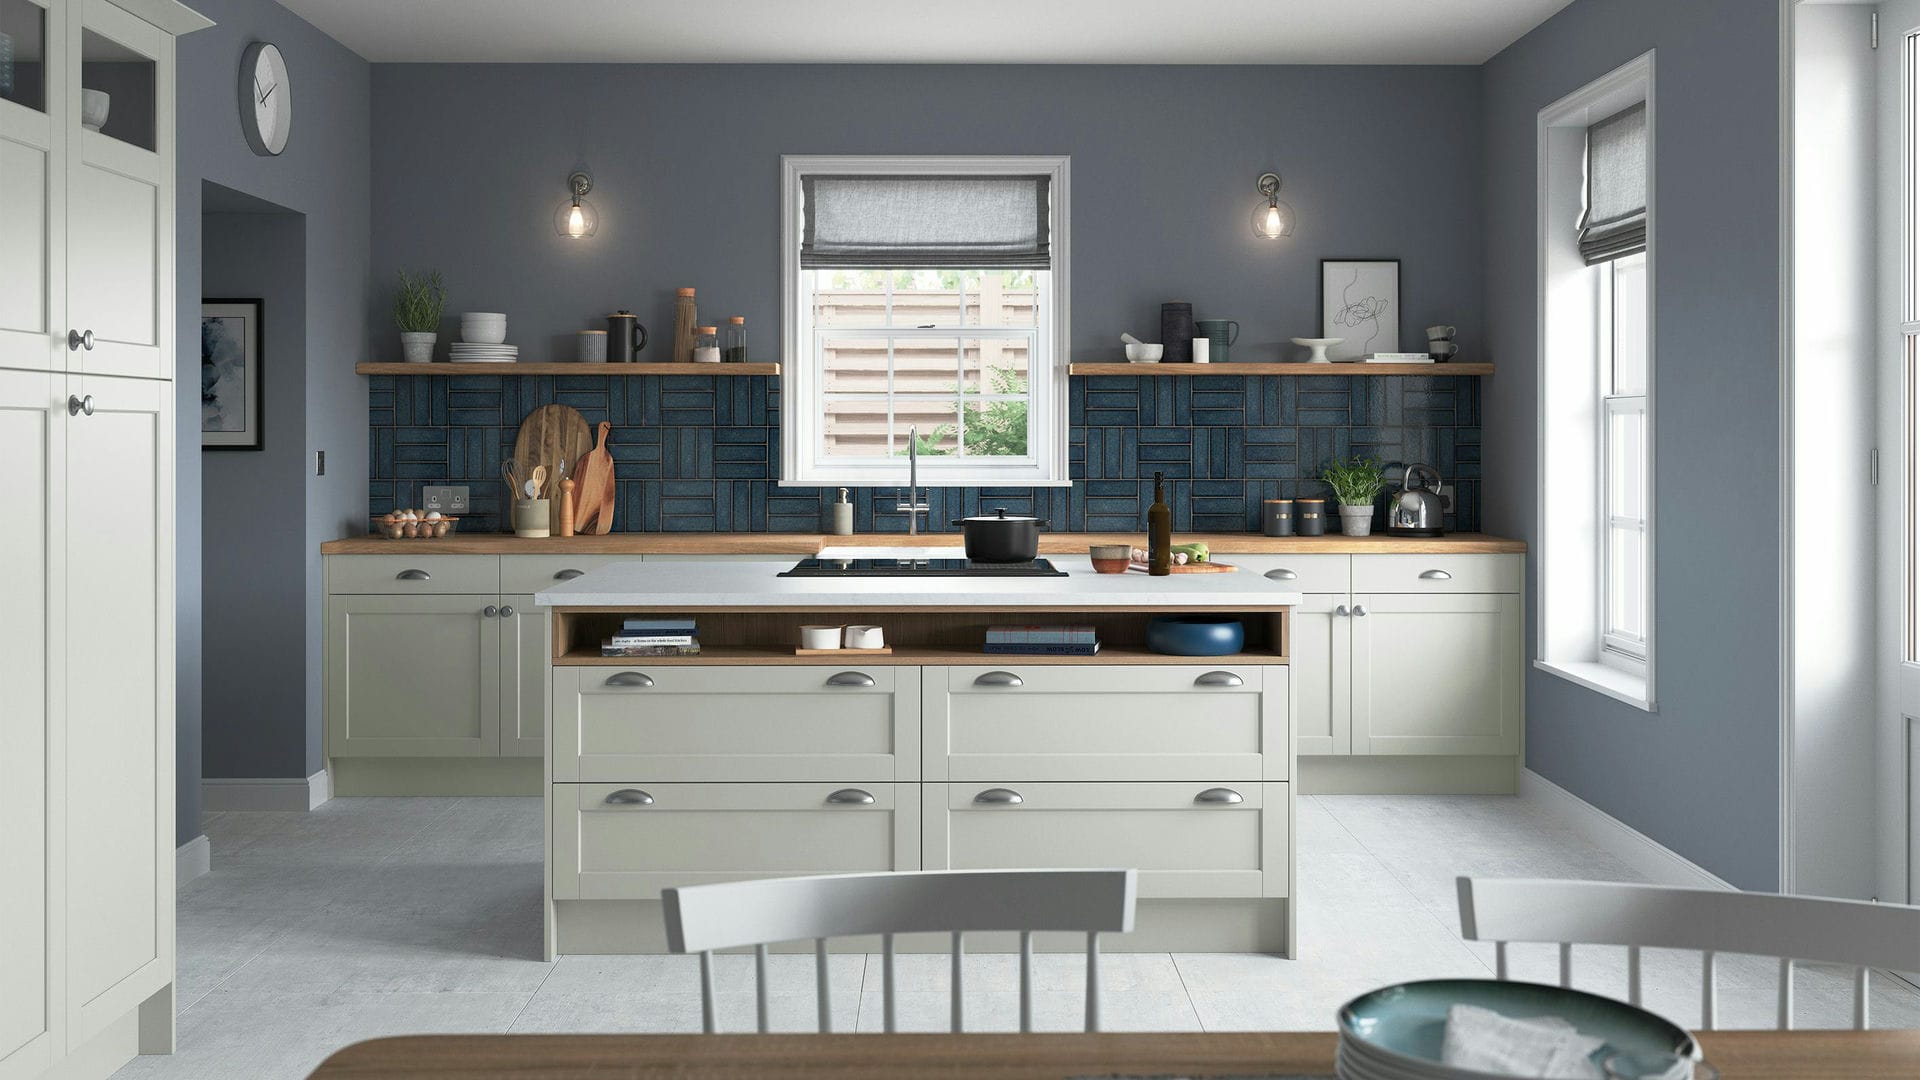 Signature smooth dove grey kitchens presenting a soft, neutral elegance for a tranquil kitchens setting